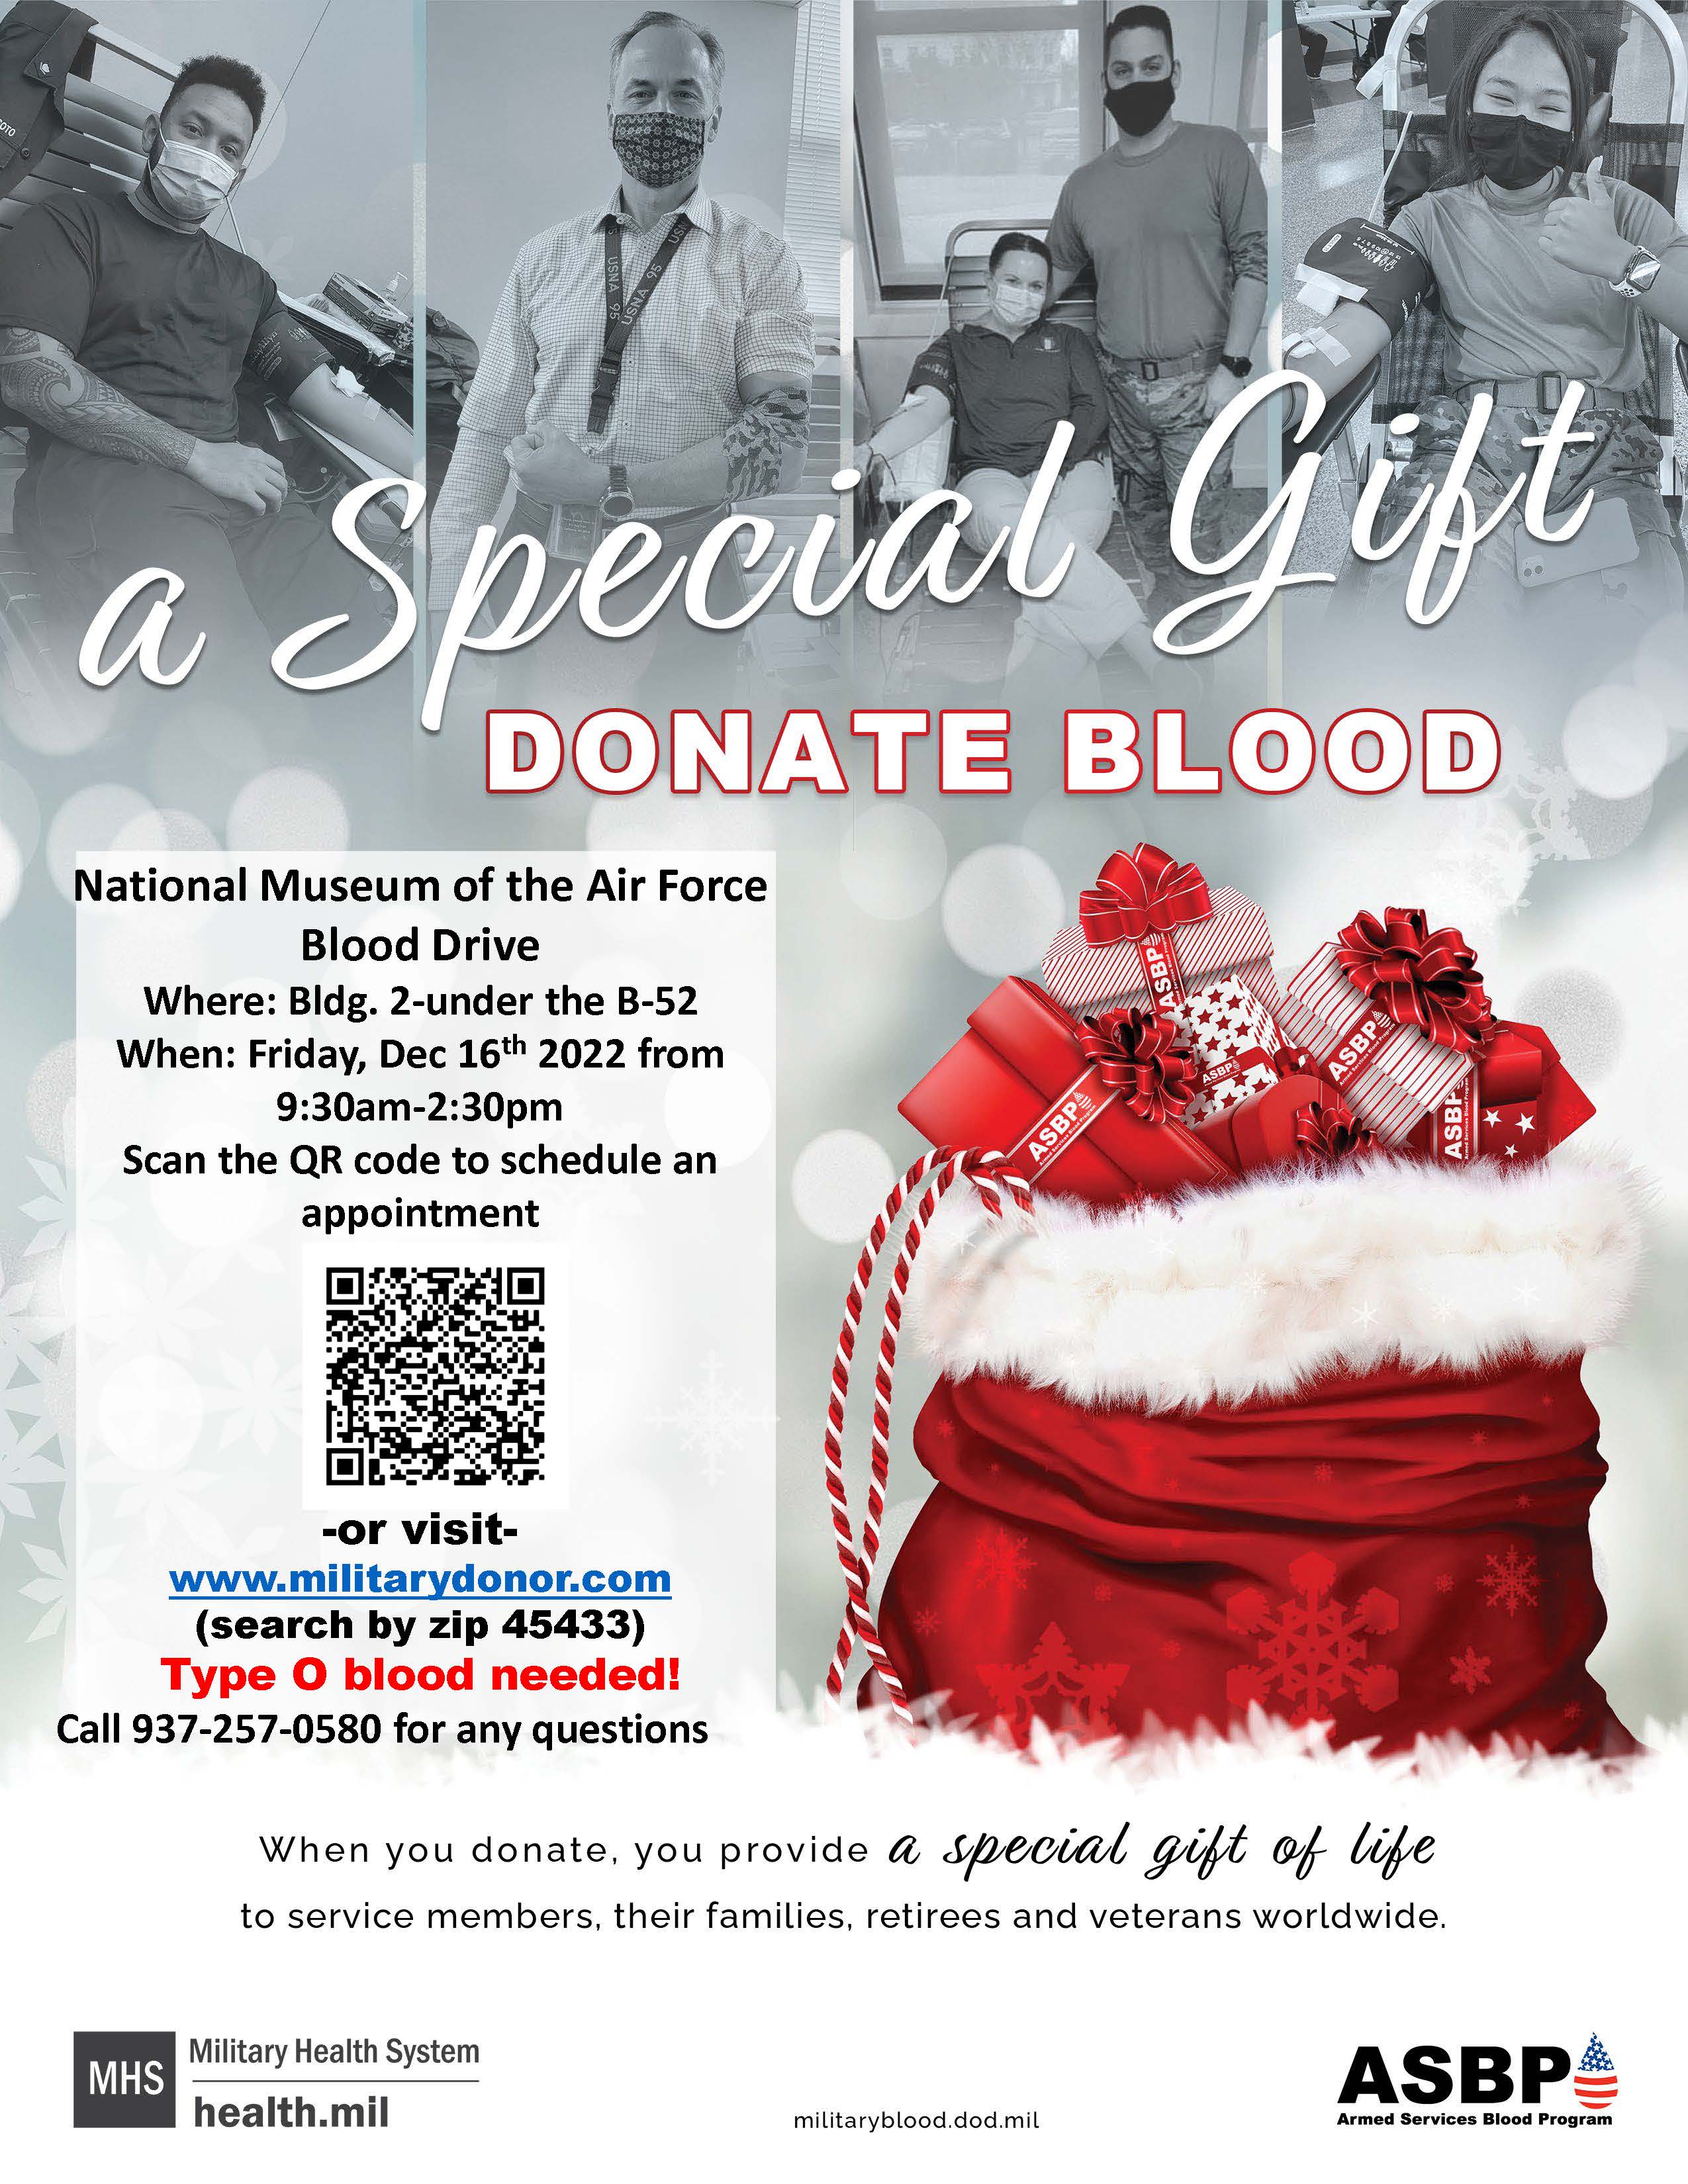 Donate Blood Flyer, Dec 16 from 9:30 a.m. - 2:30 pm at the museum under the B-52